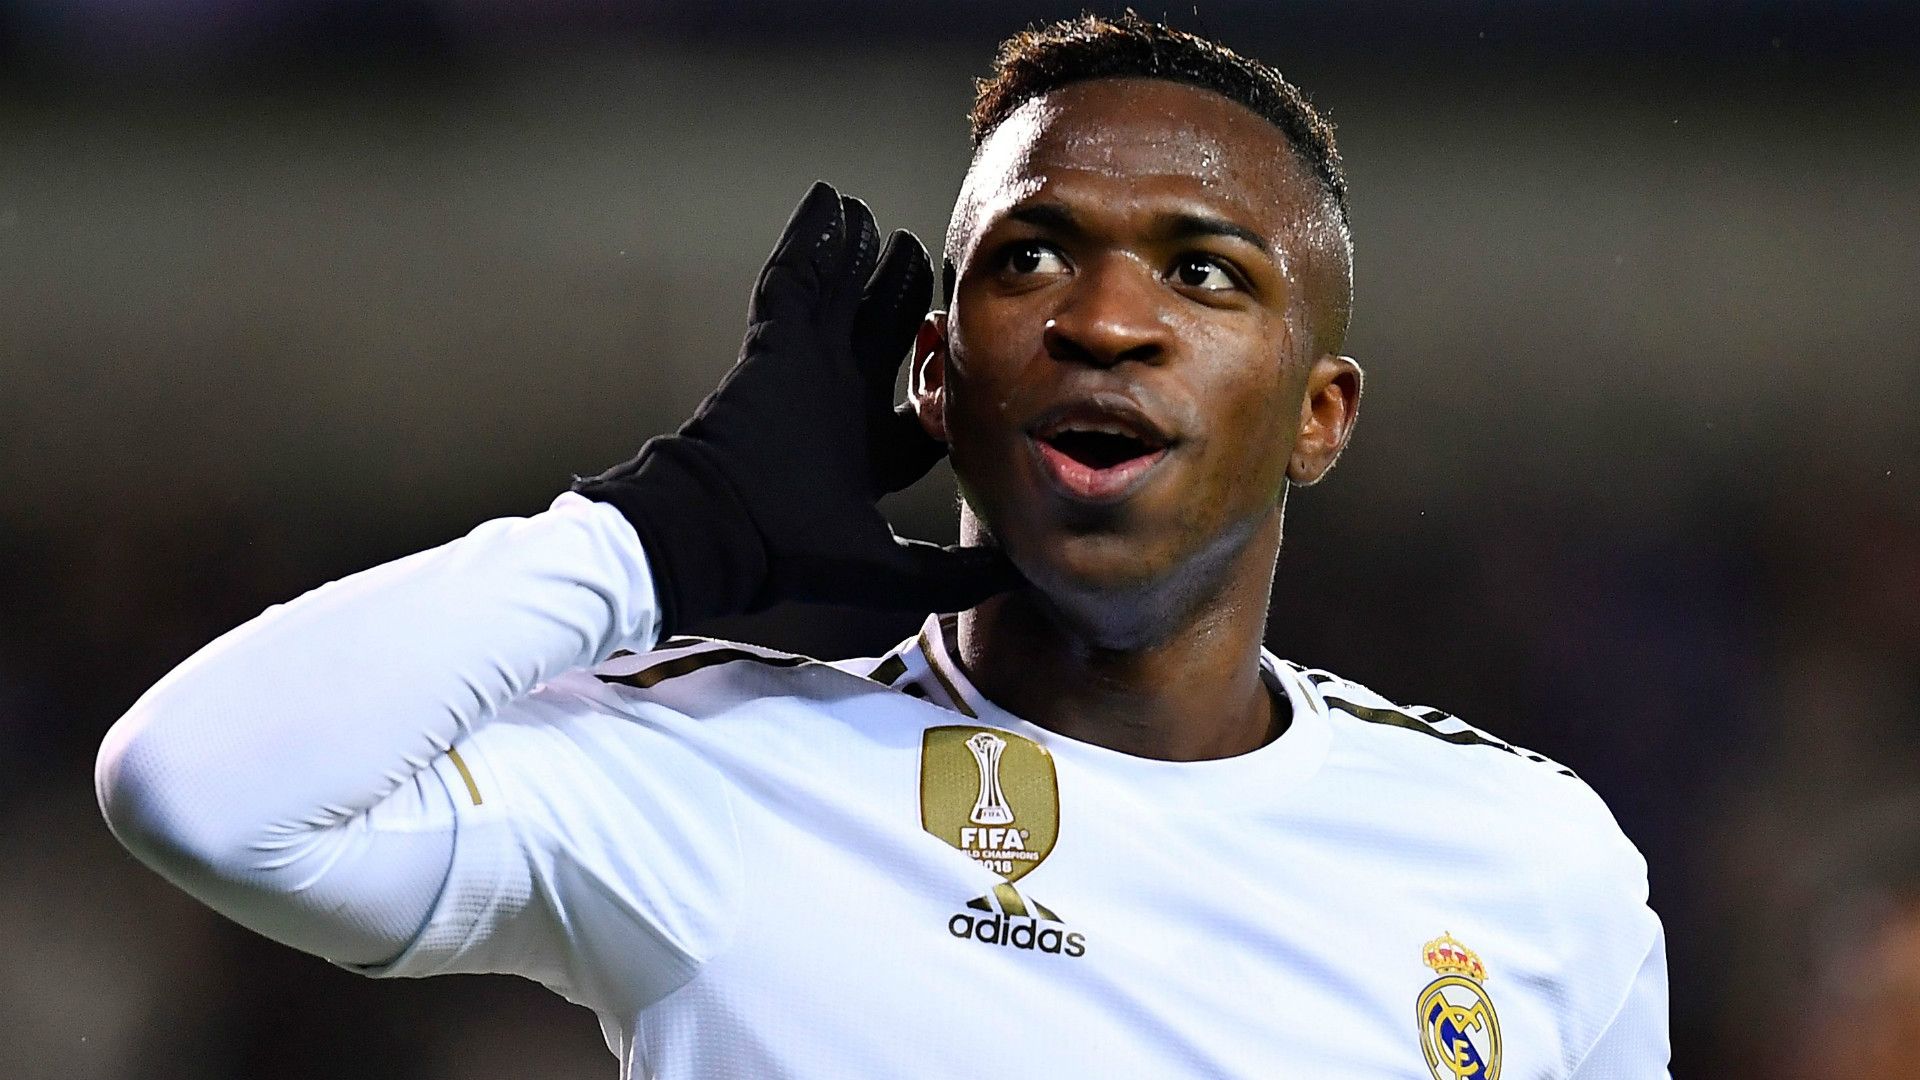 Vinicius Junior "At Real Madrid there are no dreams, there are only